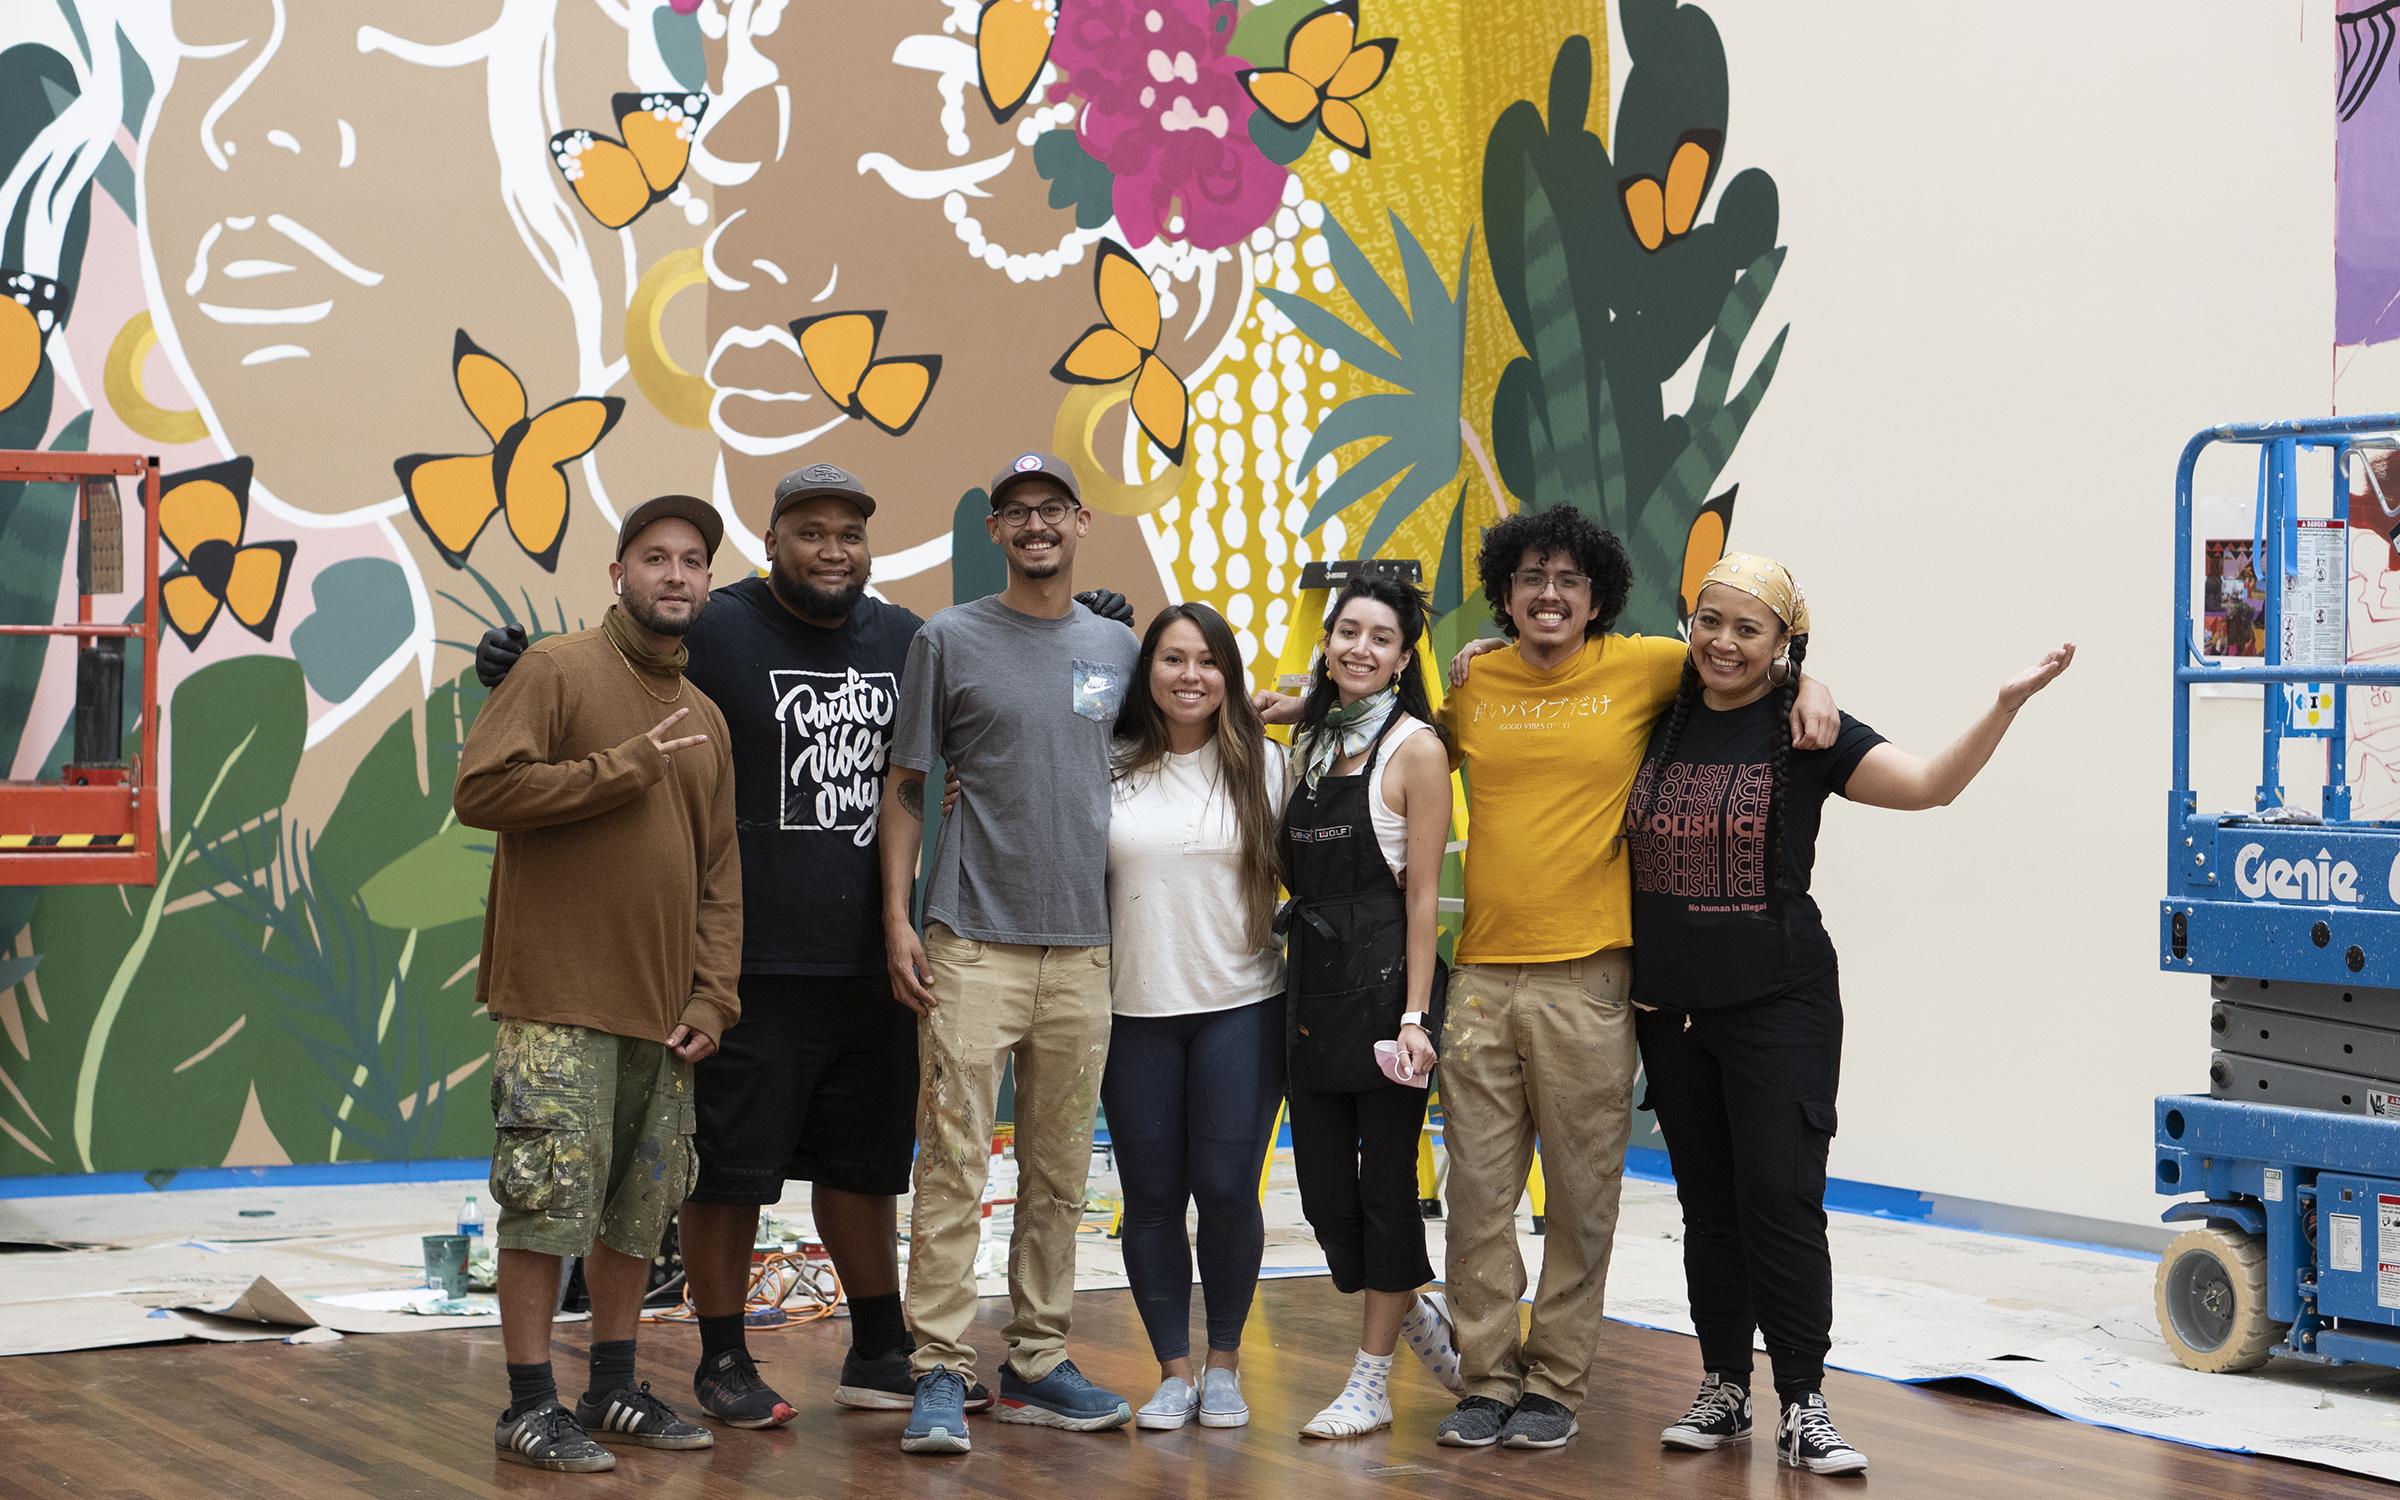 The seven muralists of 2020: From here on out posing infront of a mural in the UMFA Great Hall 